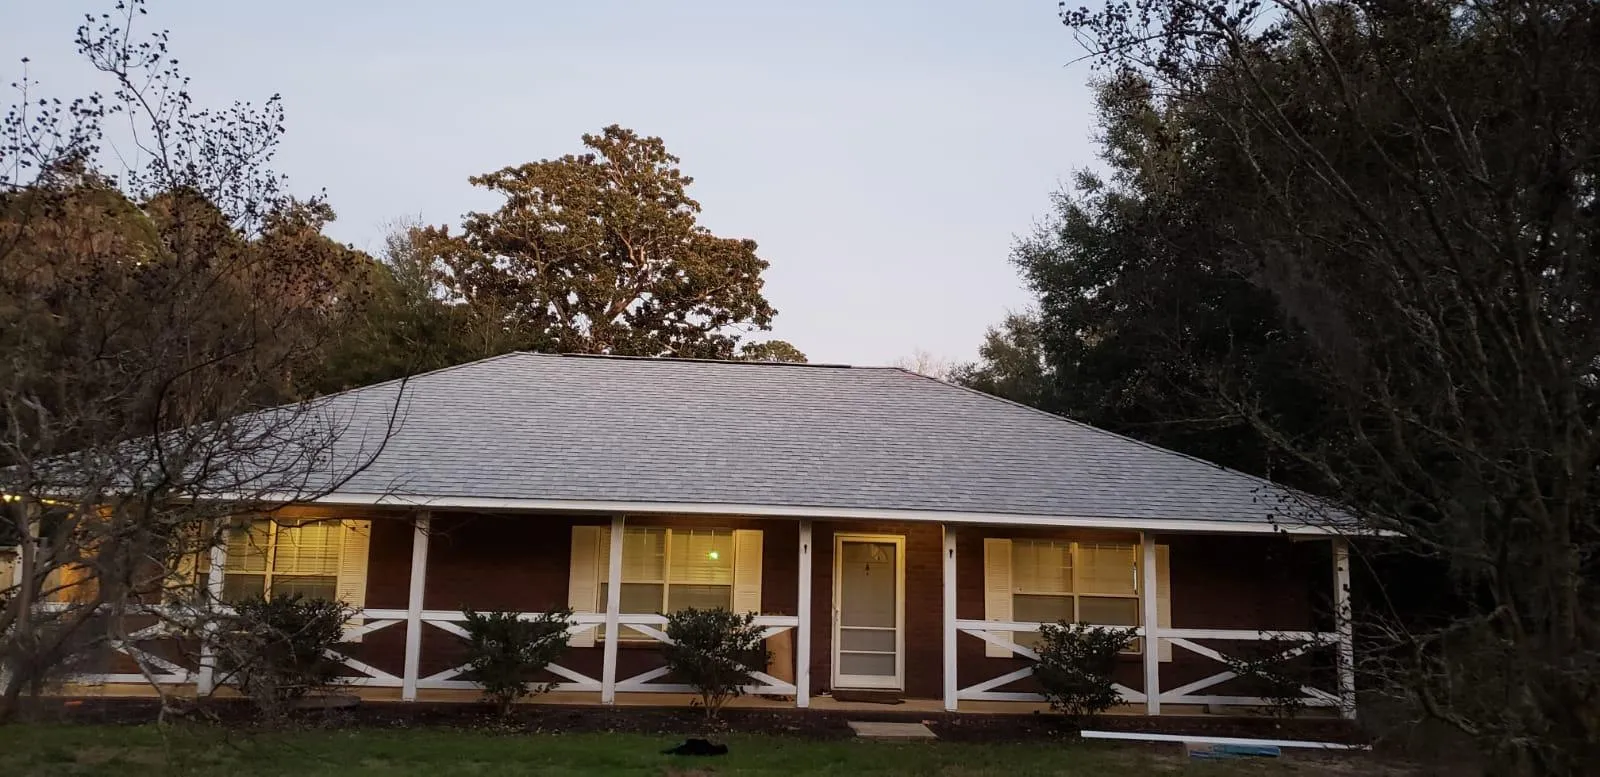 Residential Real Estate Roofing for Platinum Roofing in Crestview, FL